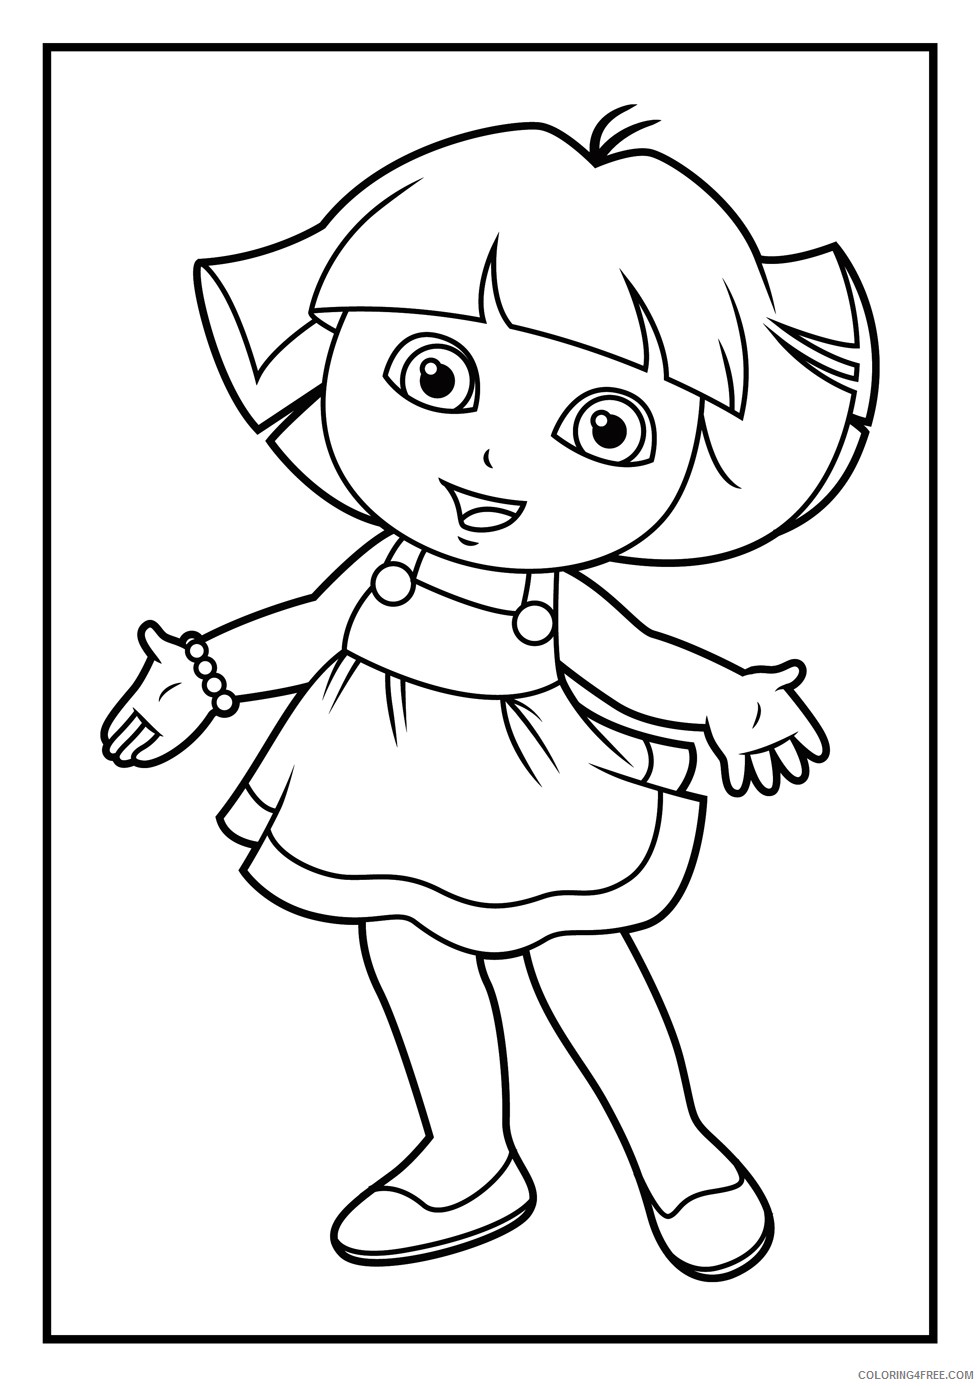 dora coloring pages to print Coloring4free